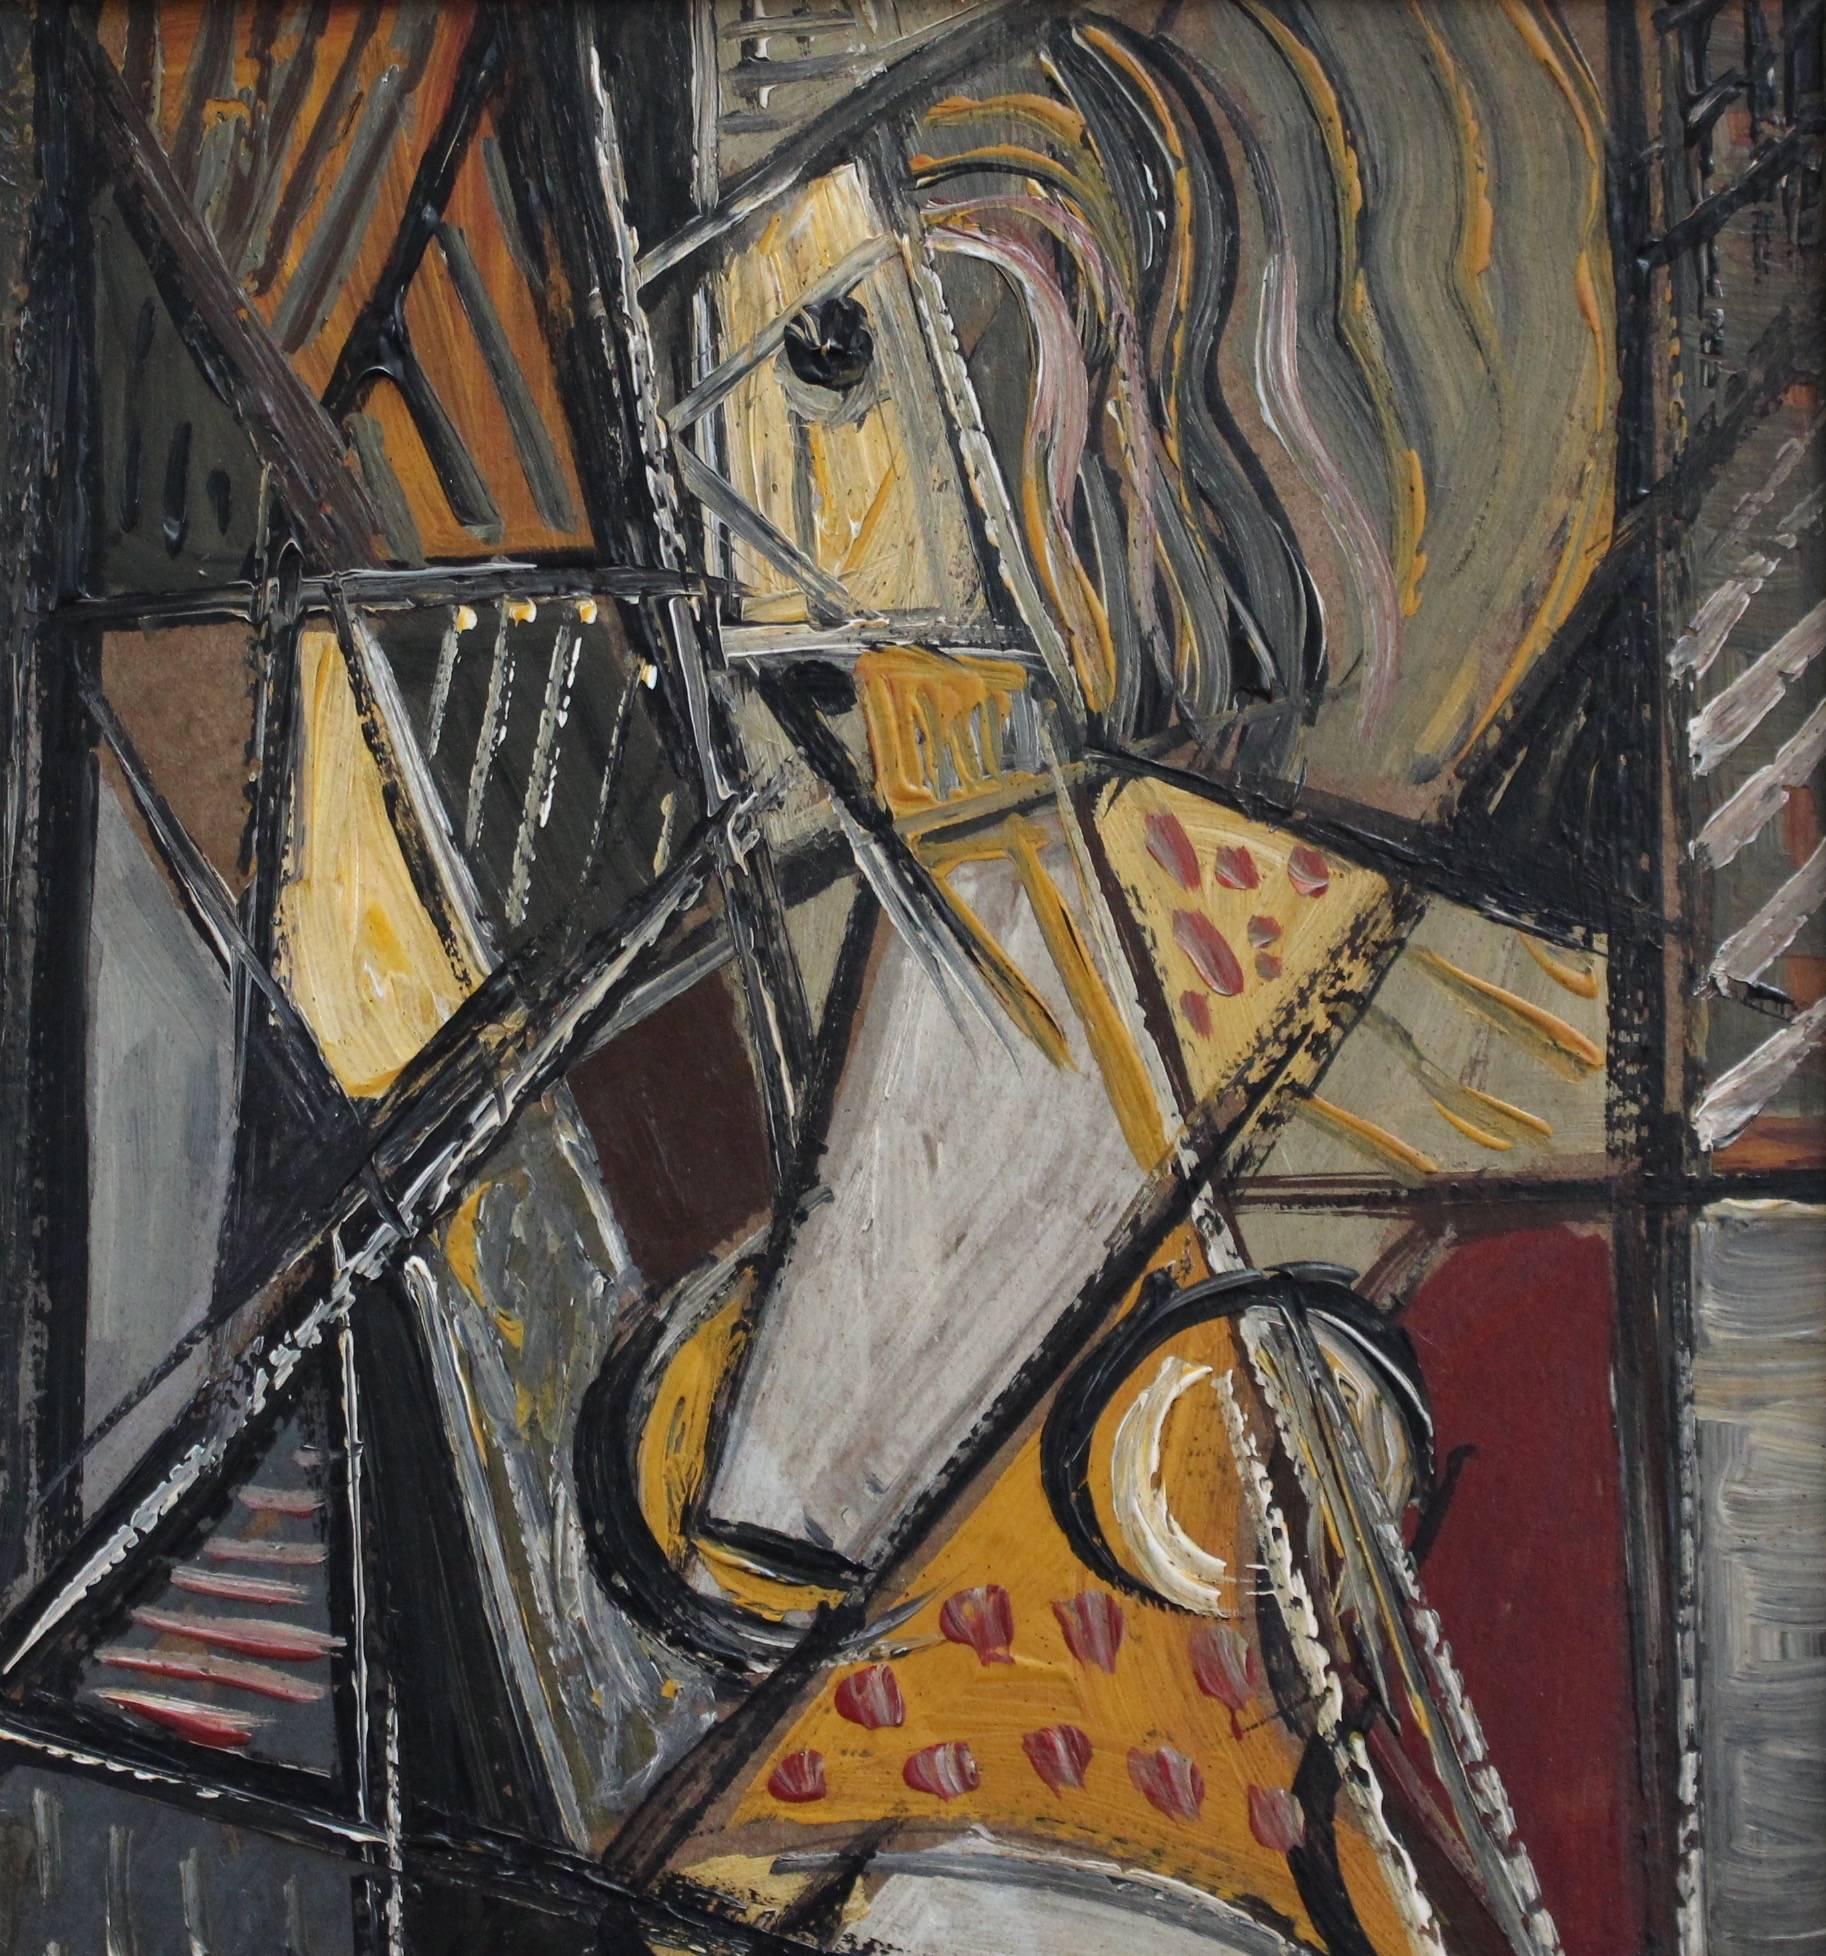 'Portrait of a Nude Woman in the Mirror', oil on board, by unknown artist (circa 1940s -1950s). When we gaze in the mirror, we like to see ourselves from all angles. This beautifully complex cubist work with a scatter of colours - yellow, maroon,